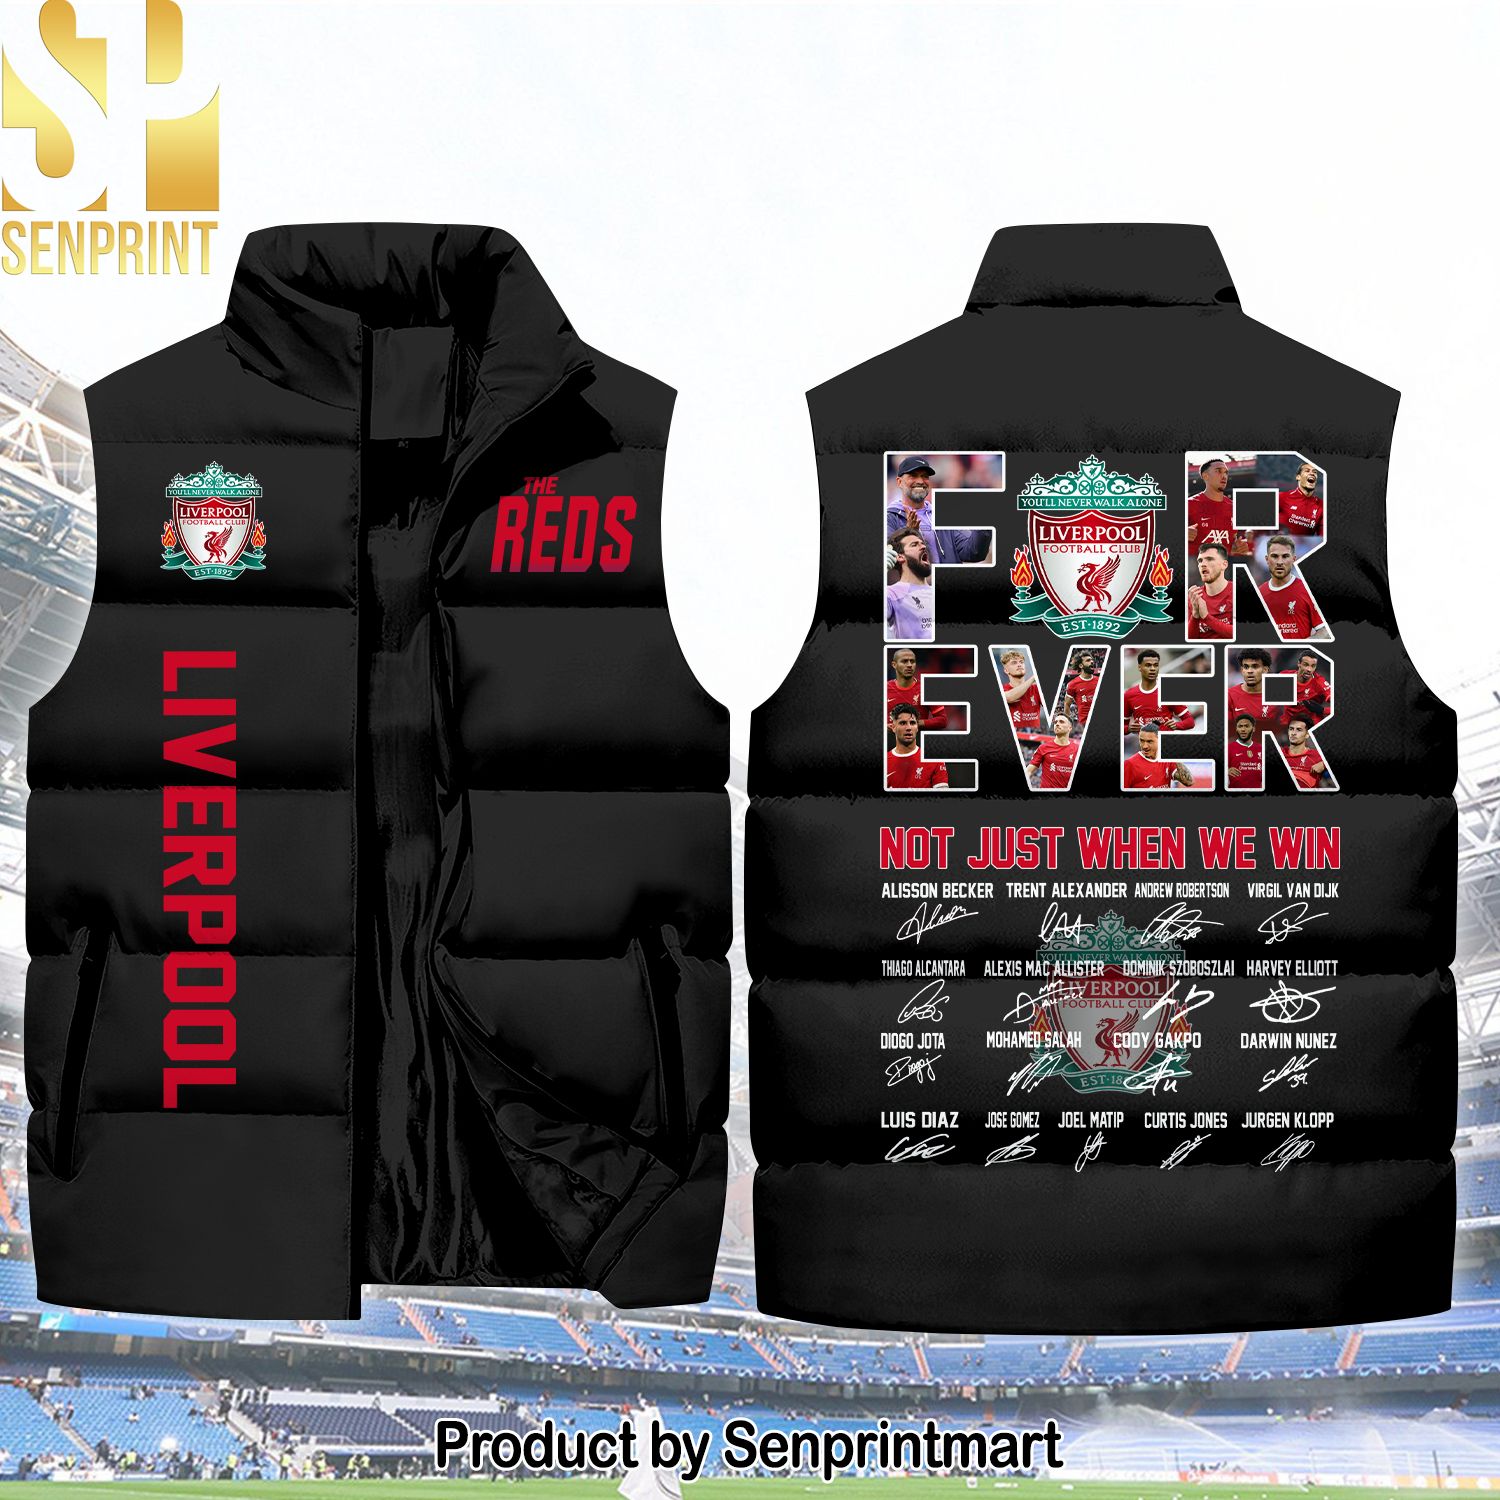 English Premier League Forever Liverpool Cool Version Sleeveless Jacket